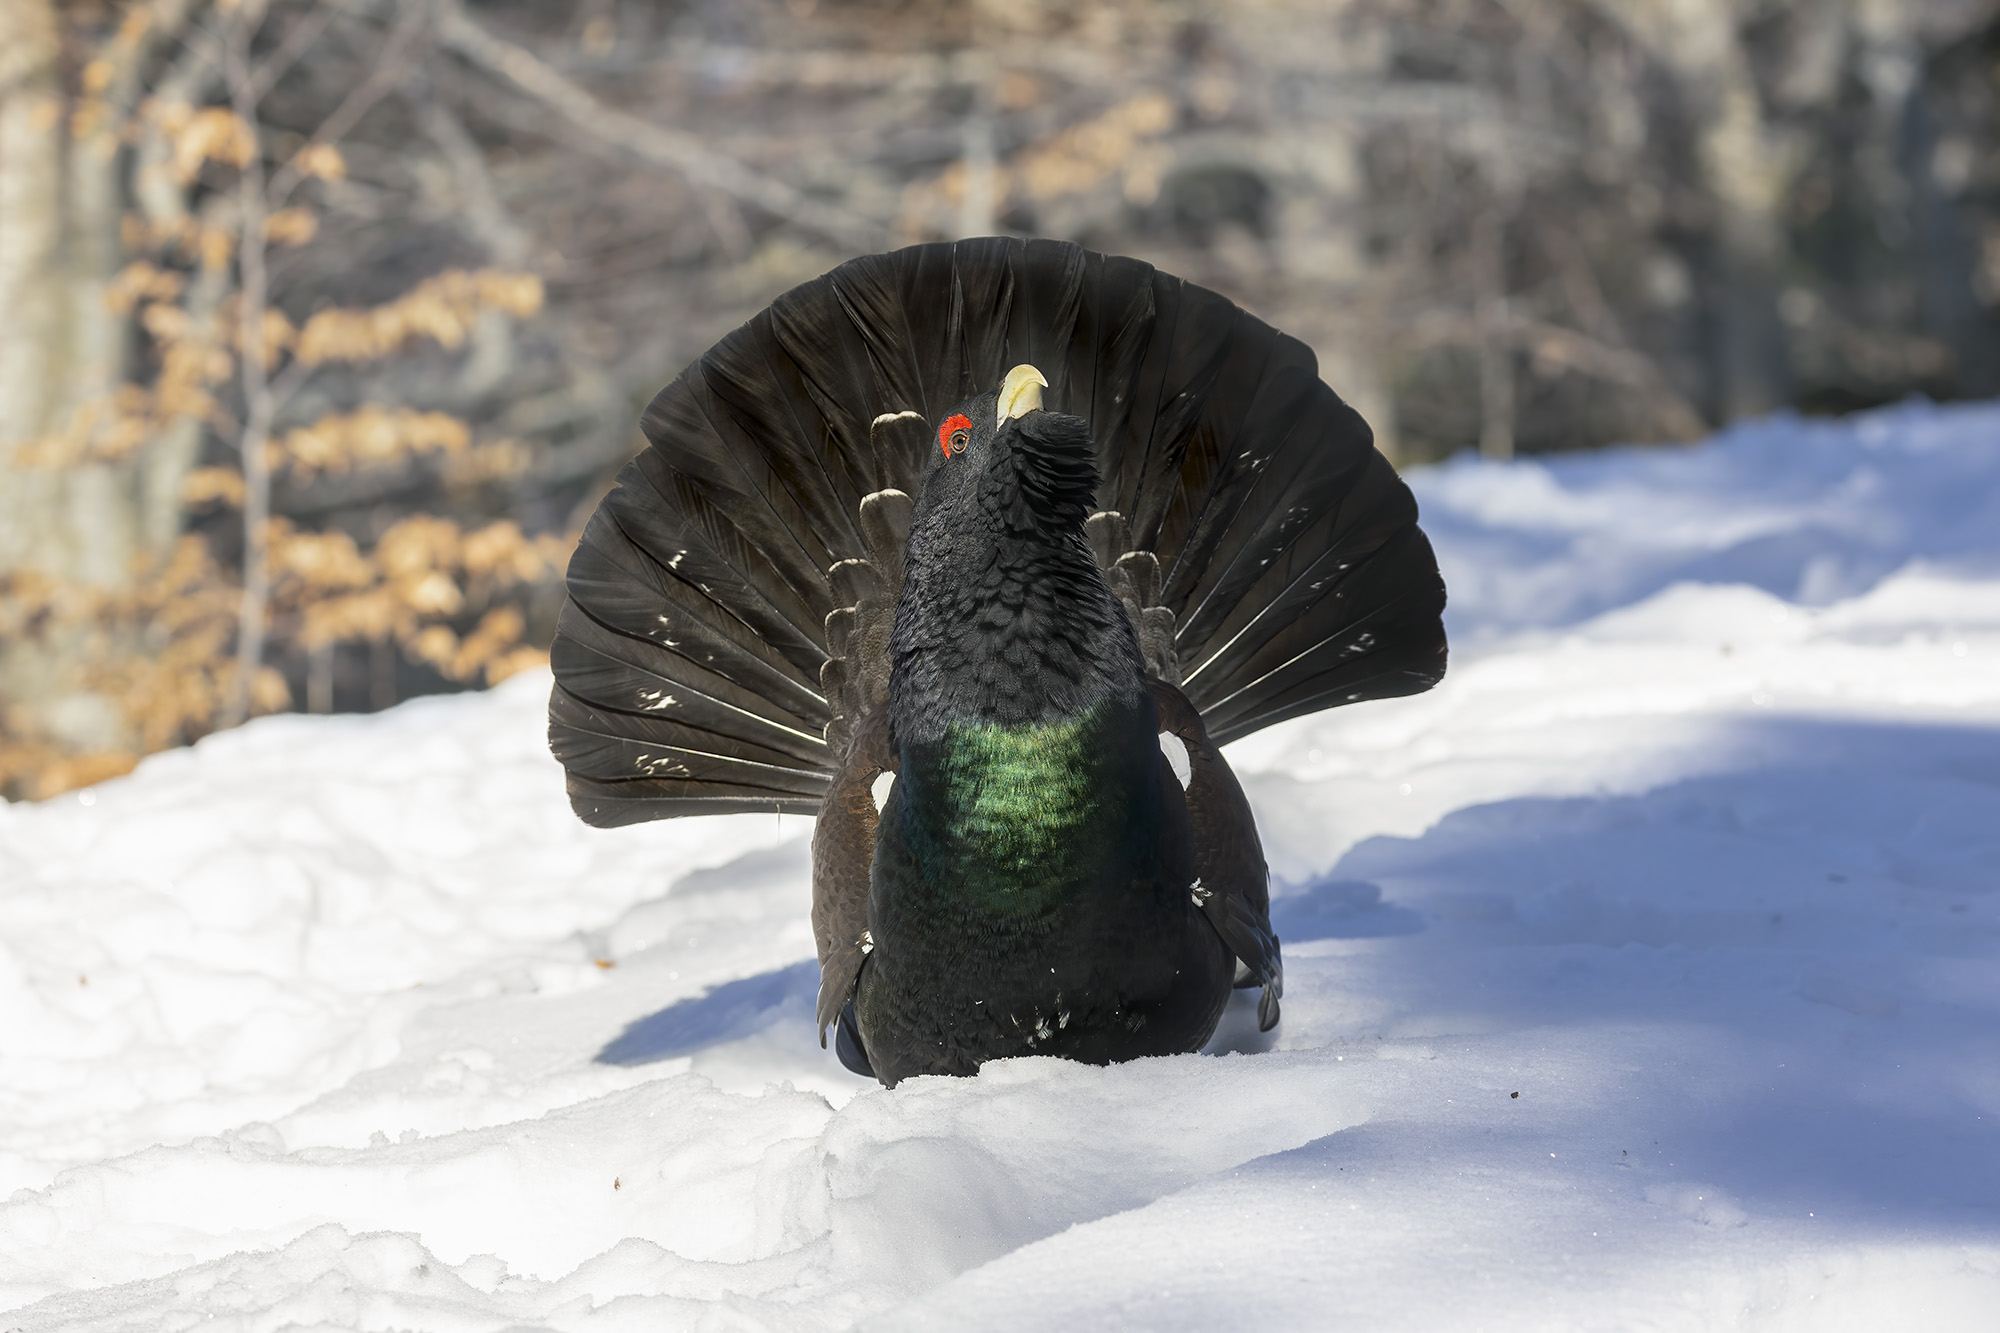 sinking into the snow, capercaillie...